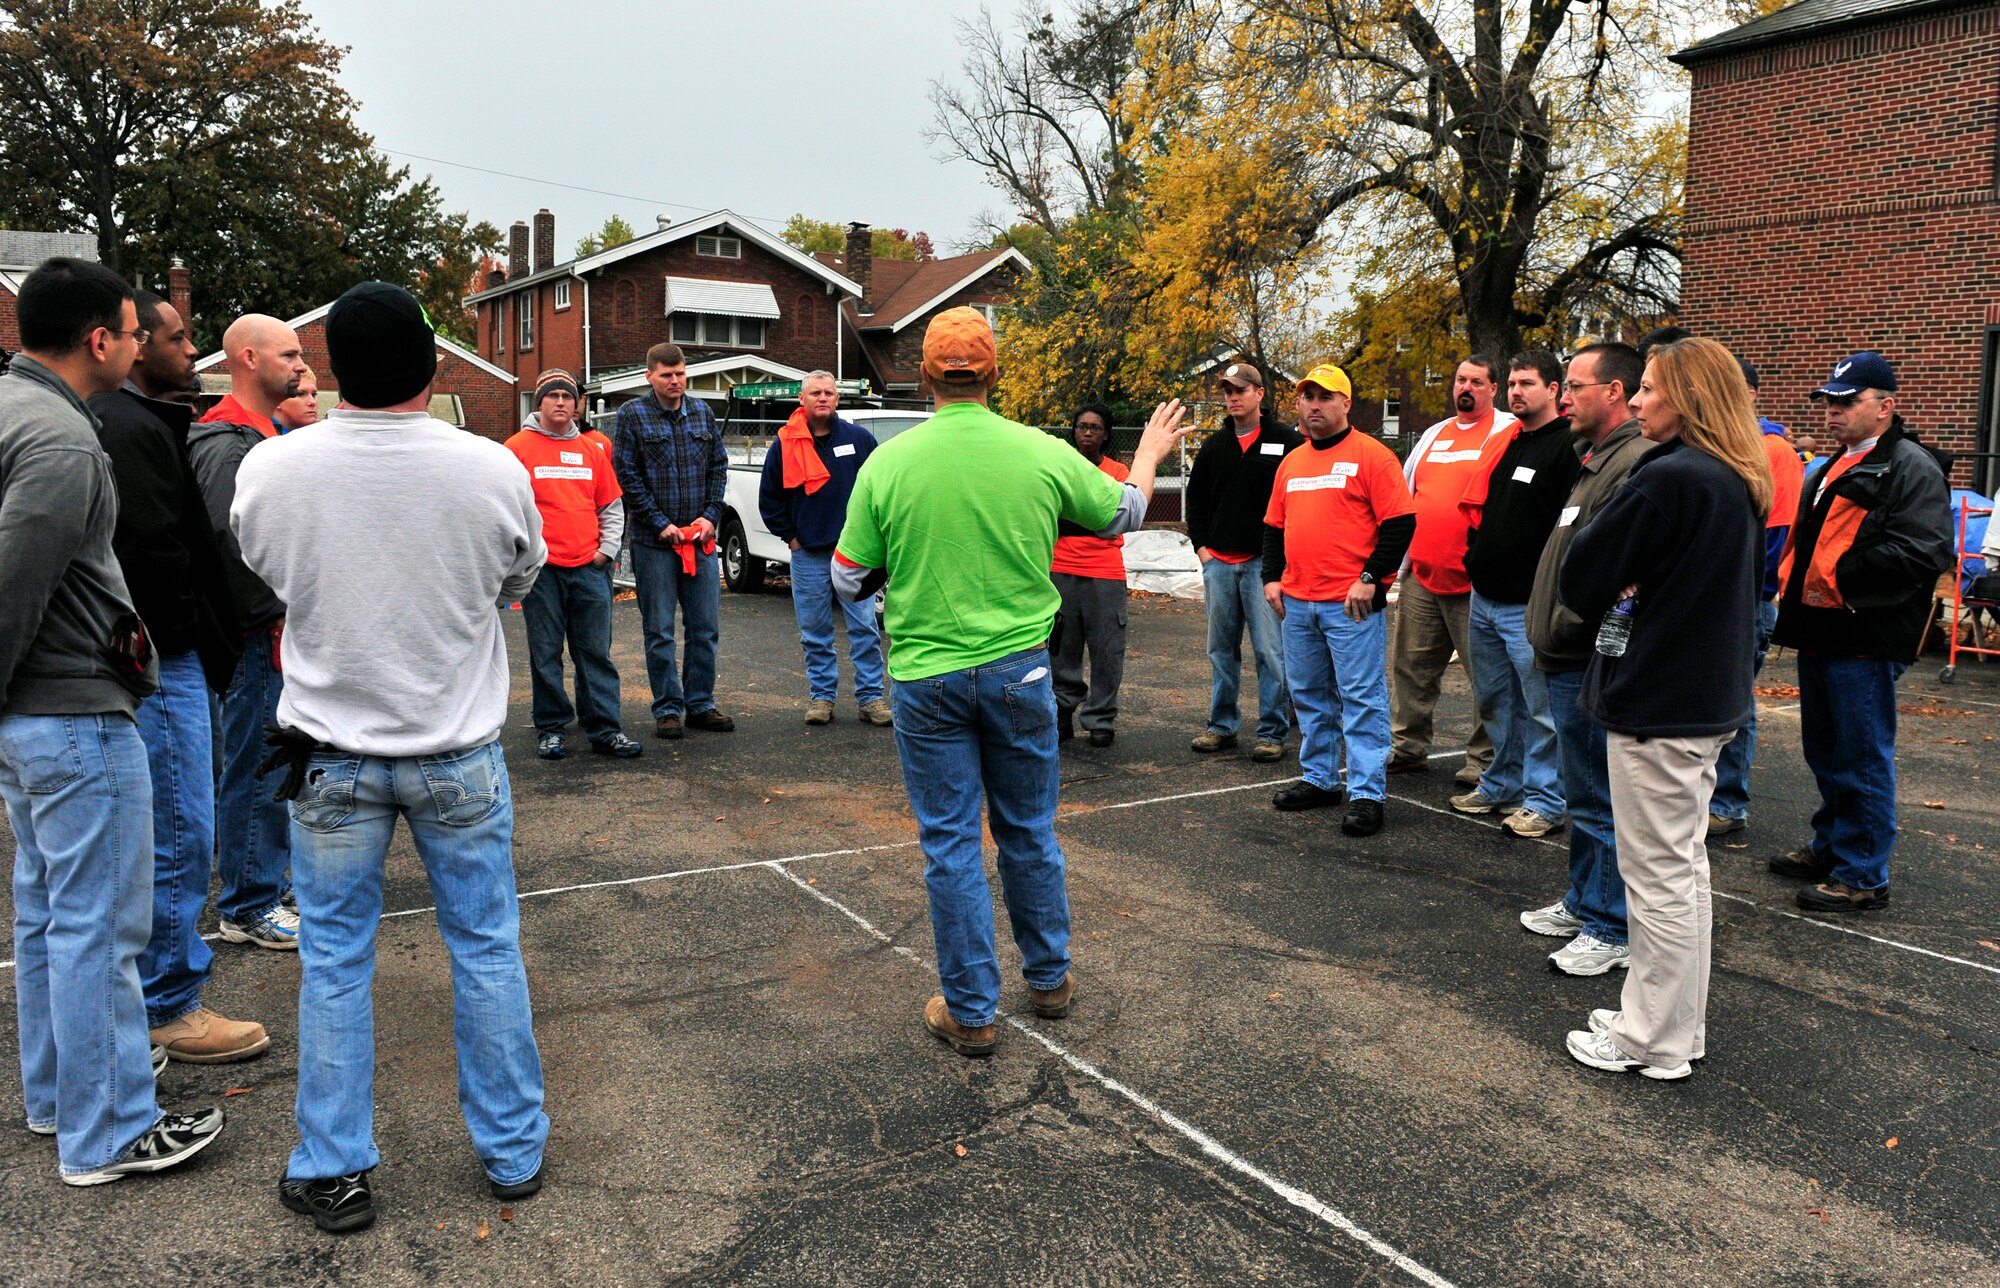 Team Scott and community  volunteers receive instructions from their group leader Oct. 27 during the Celebration of Service campaign event in Saint Louis, Mo. The volunteers rehabilitated a donated church building into a technology training and resource center for veterans allowing them a place to transition from military into civilian life.  The new facility will provide veterans with instruction and skills training to preparing them for employment The campaign launched by Home Depot and the Mission Continues, was created to enhance the lives of U.S. military veterans and to highlight the needs and opportunities they face.  (U.S. Air Force photo/ Staff Sgt. Stephenie Wade)